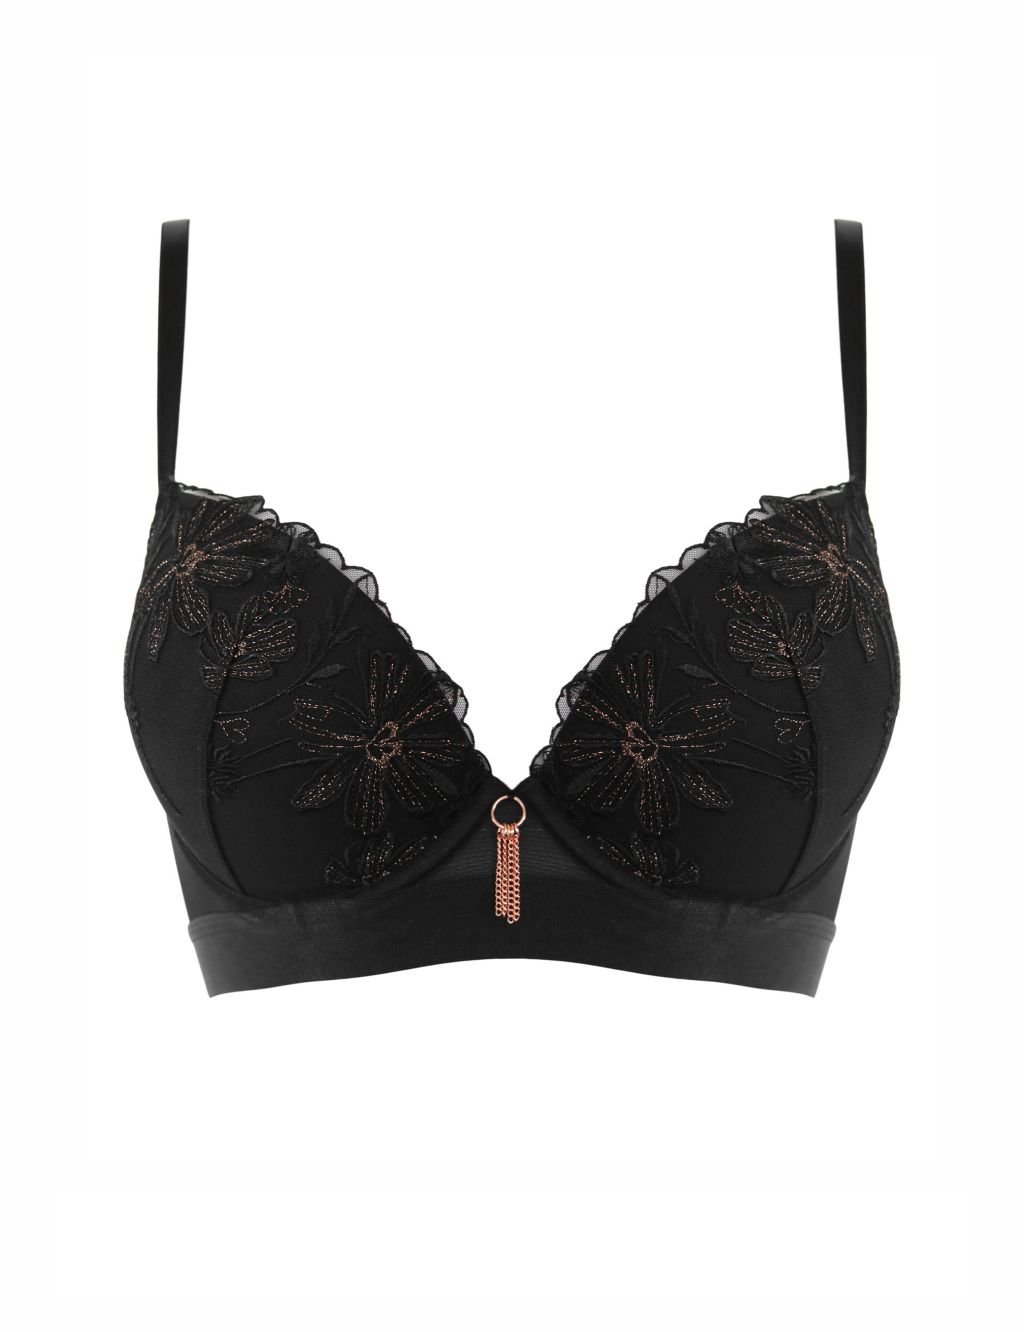 Constance Wired Push-Up Bra A-F | Pour Moi | M&S